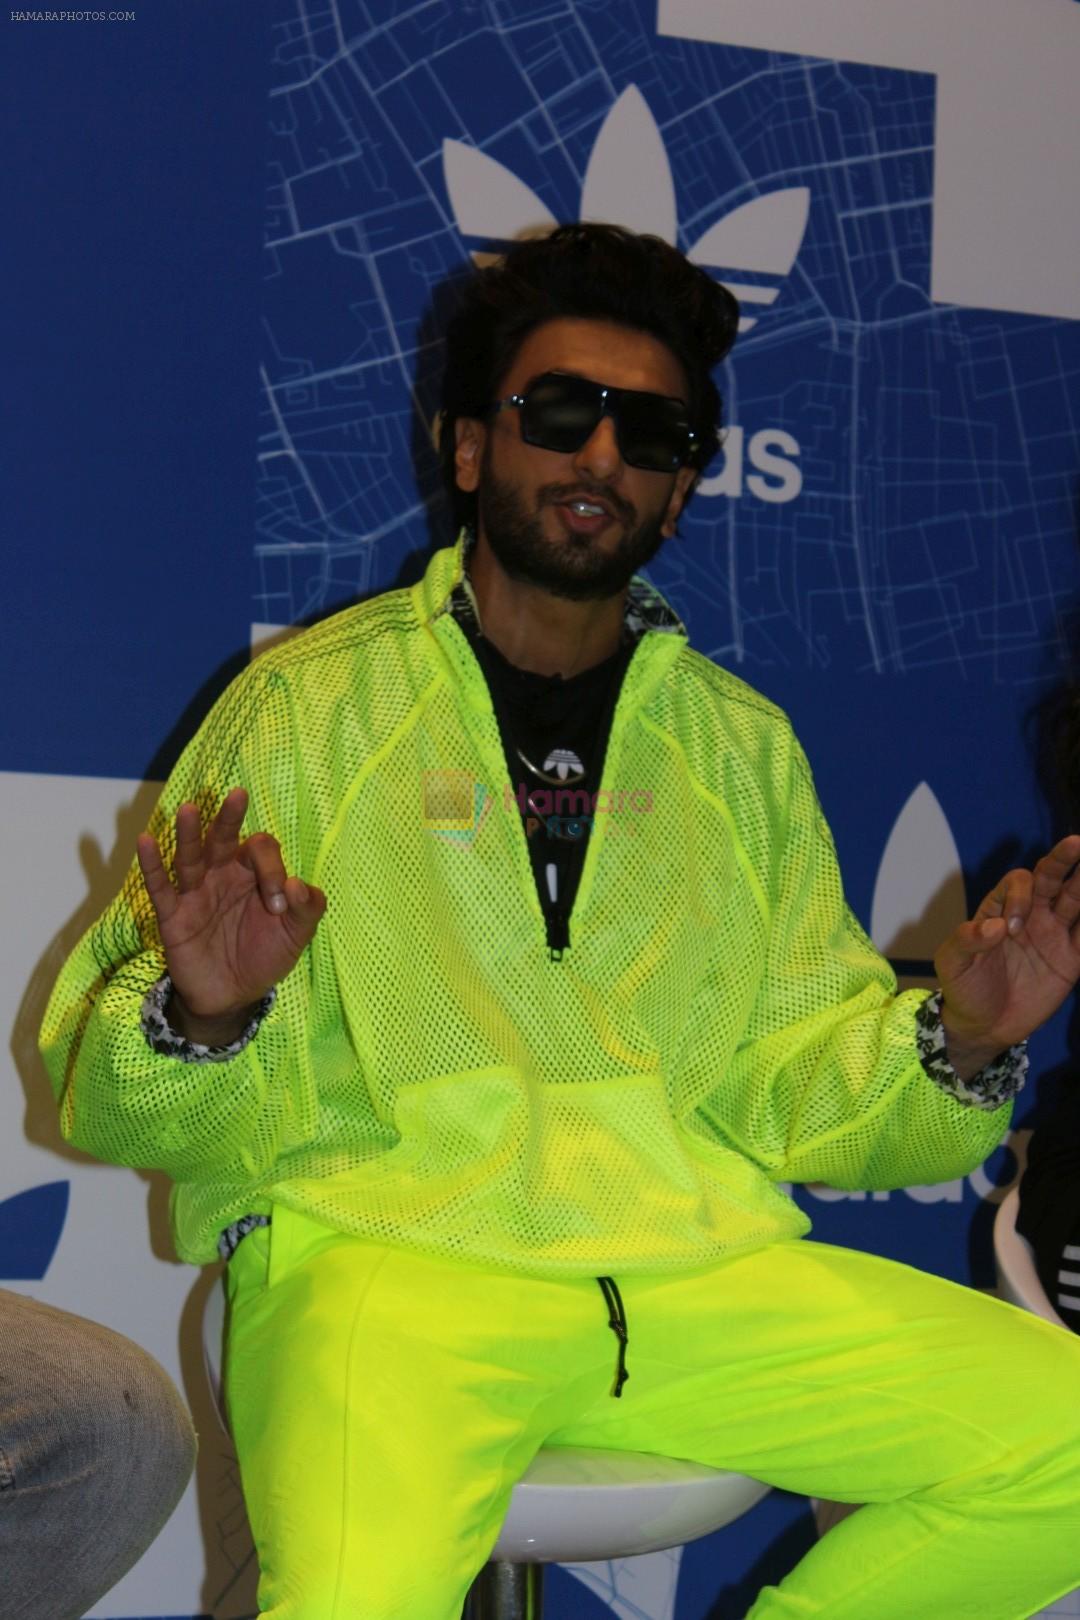 Ranveer Singh at the Launch Of Adidas OFDD Store on 21st Nov 2017